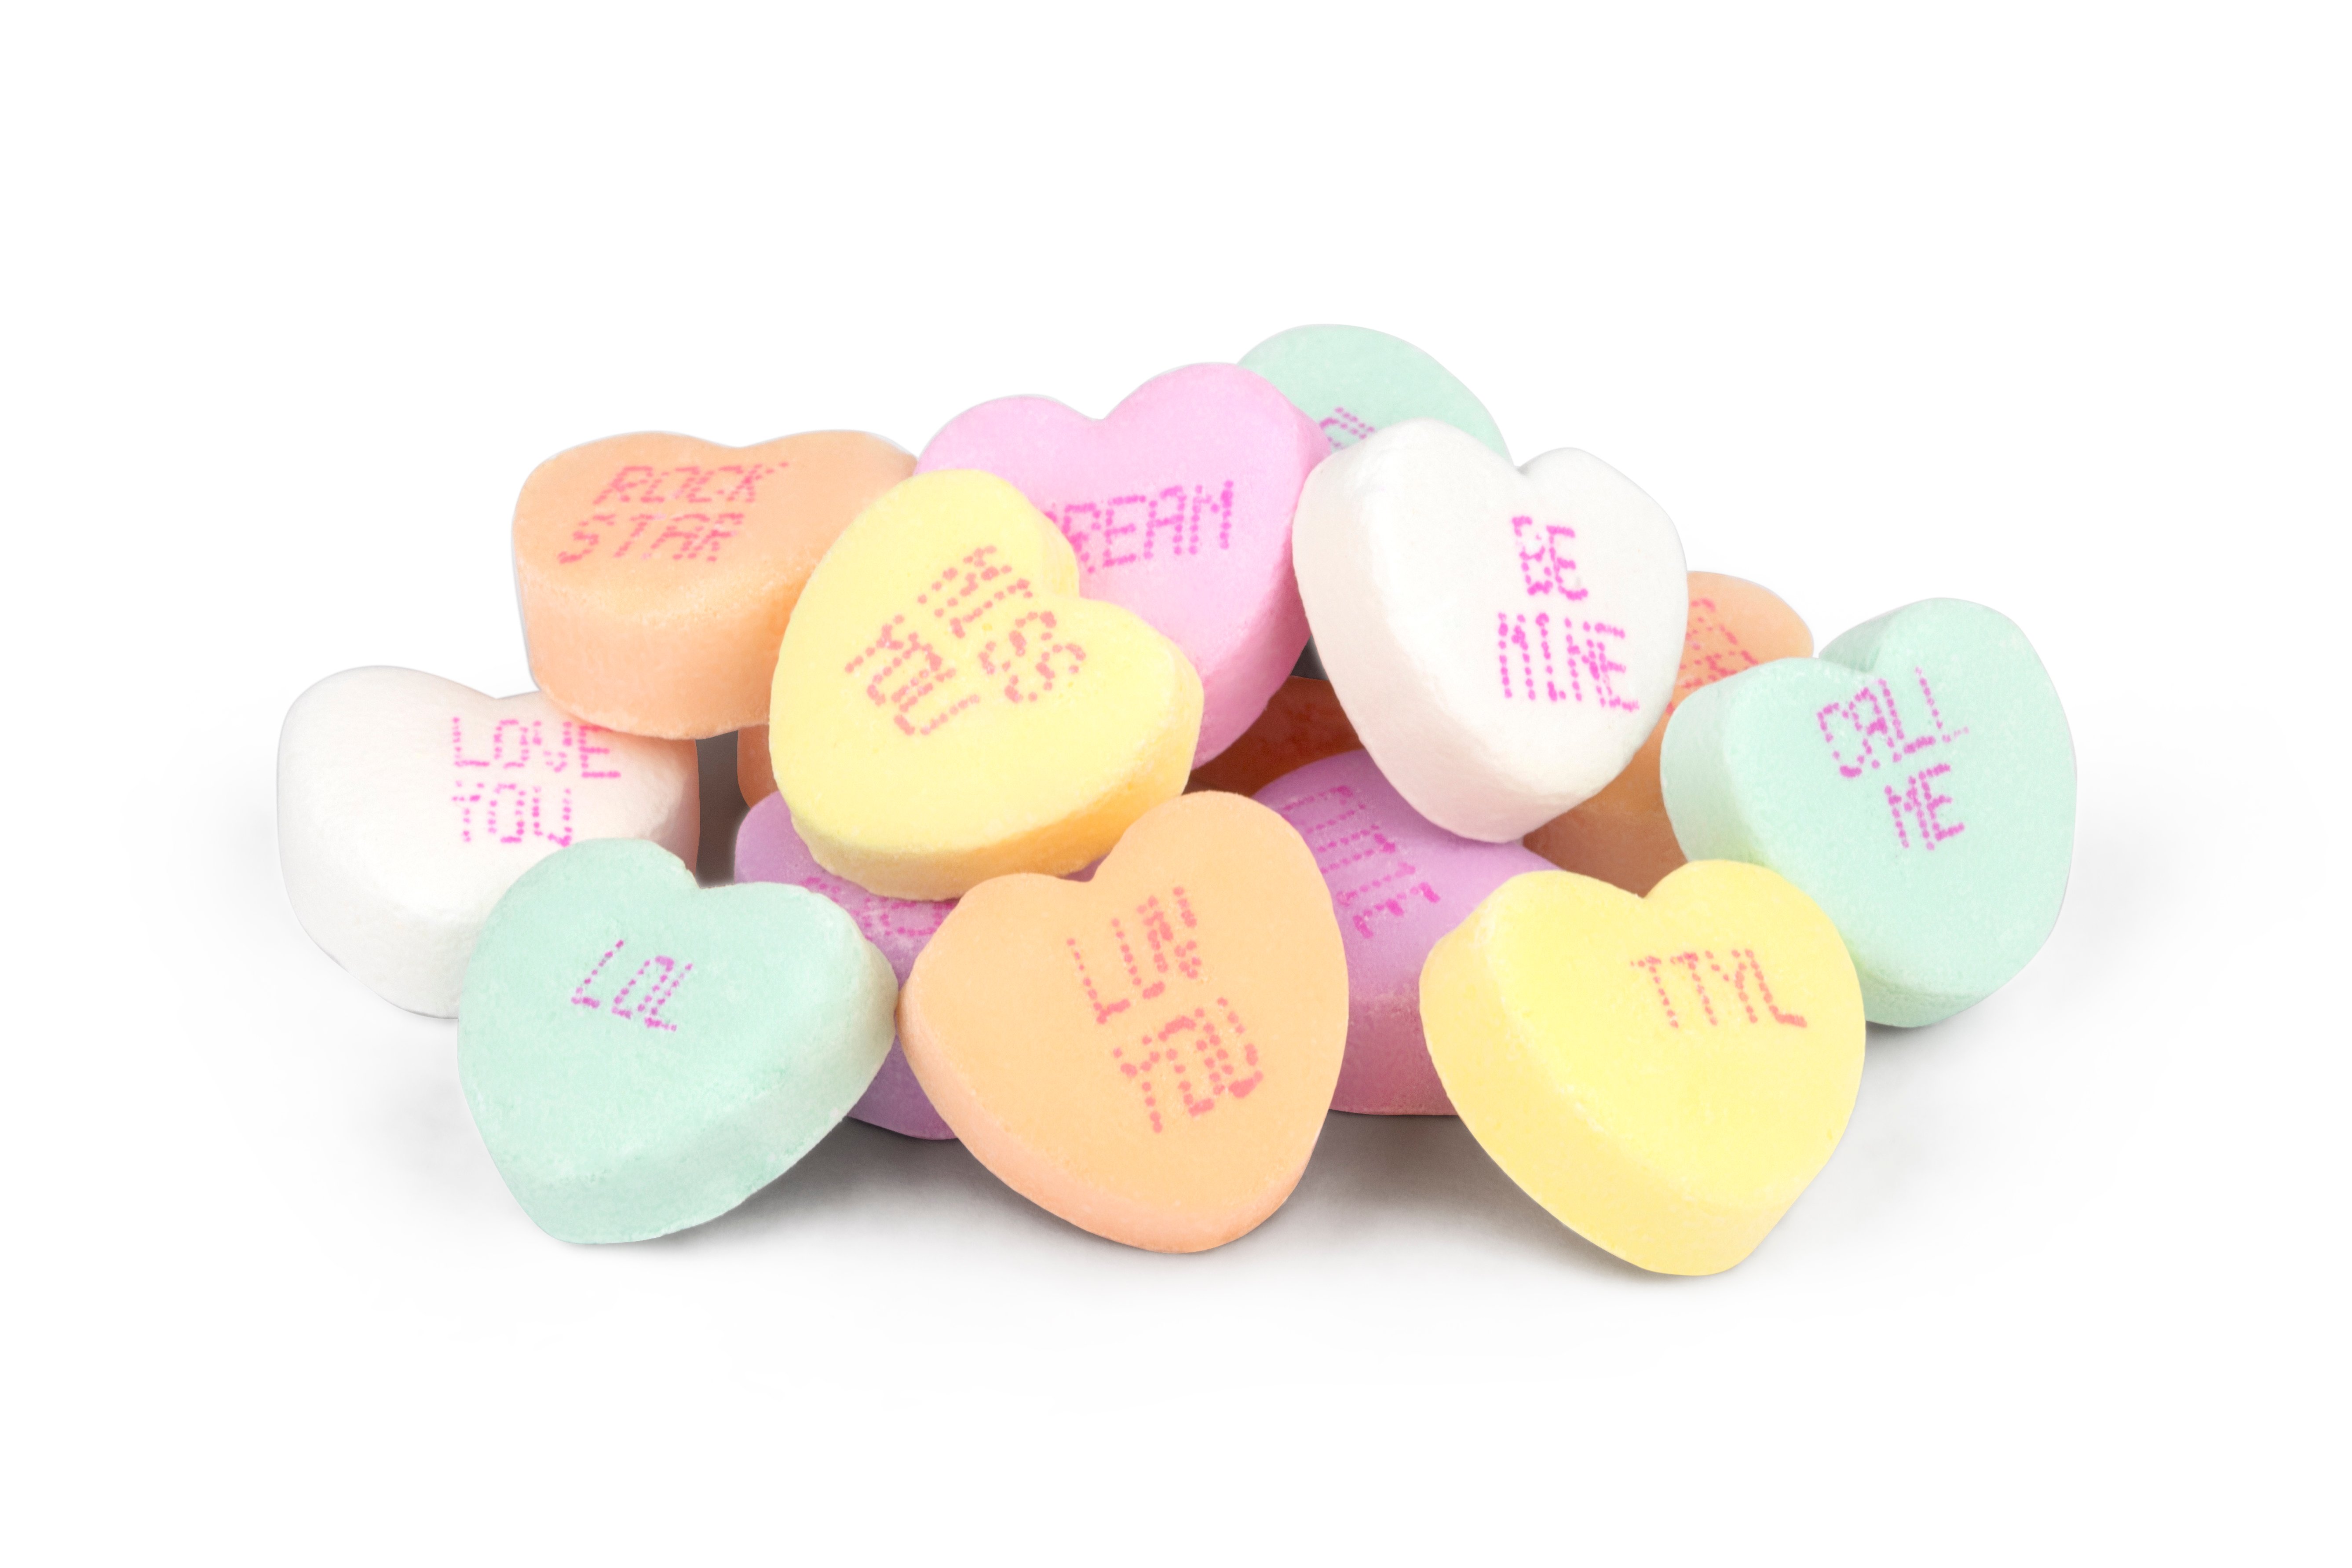 The Untold Truth Of Sweethearts Conversation Hearts